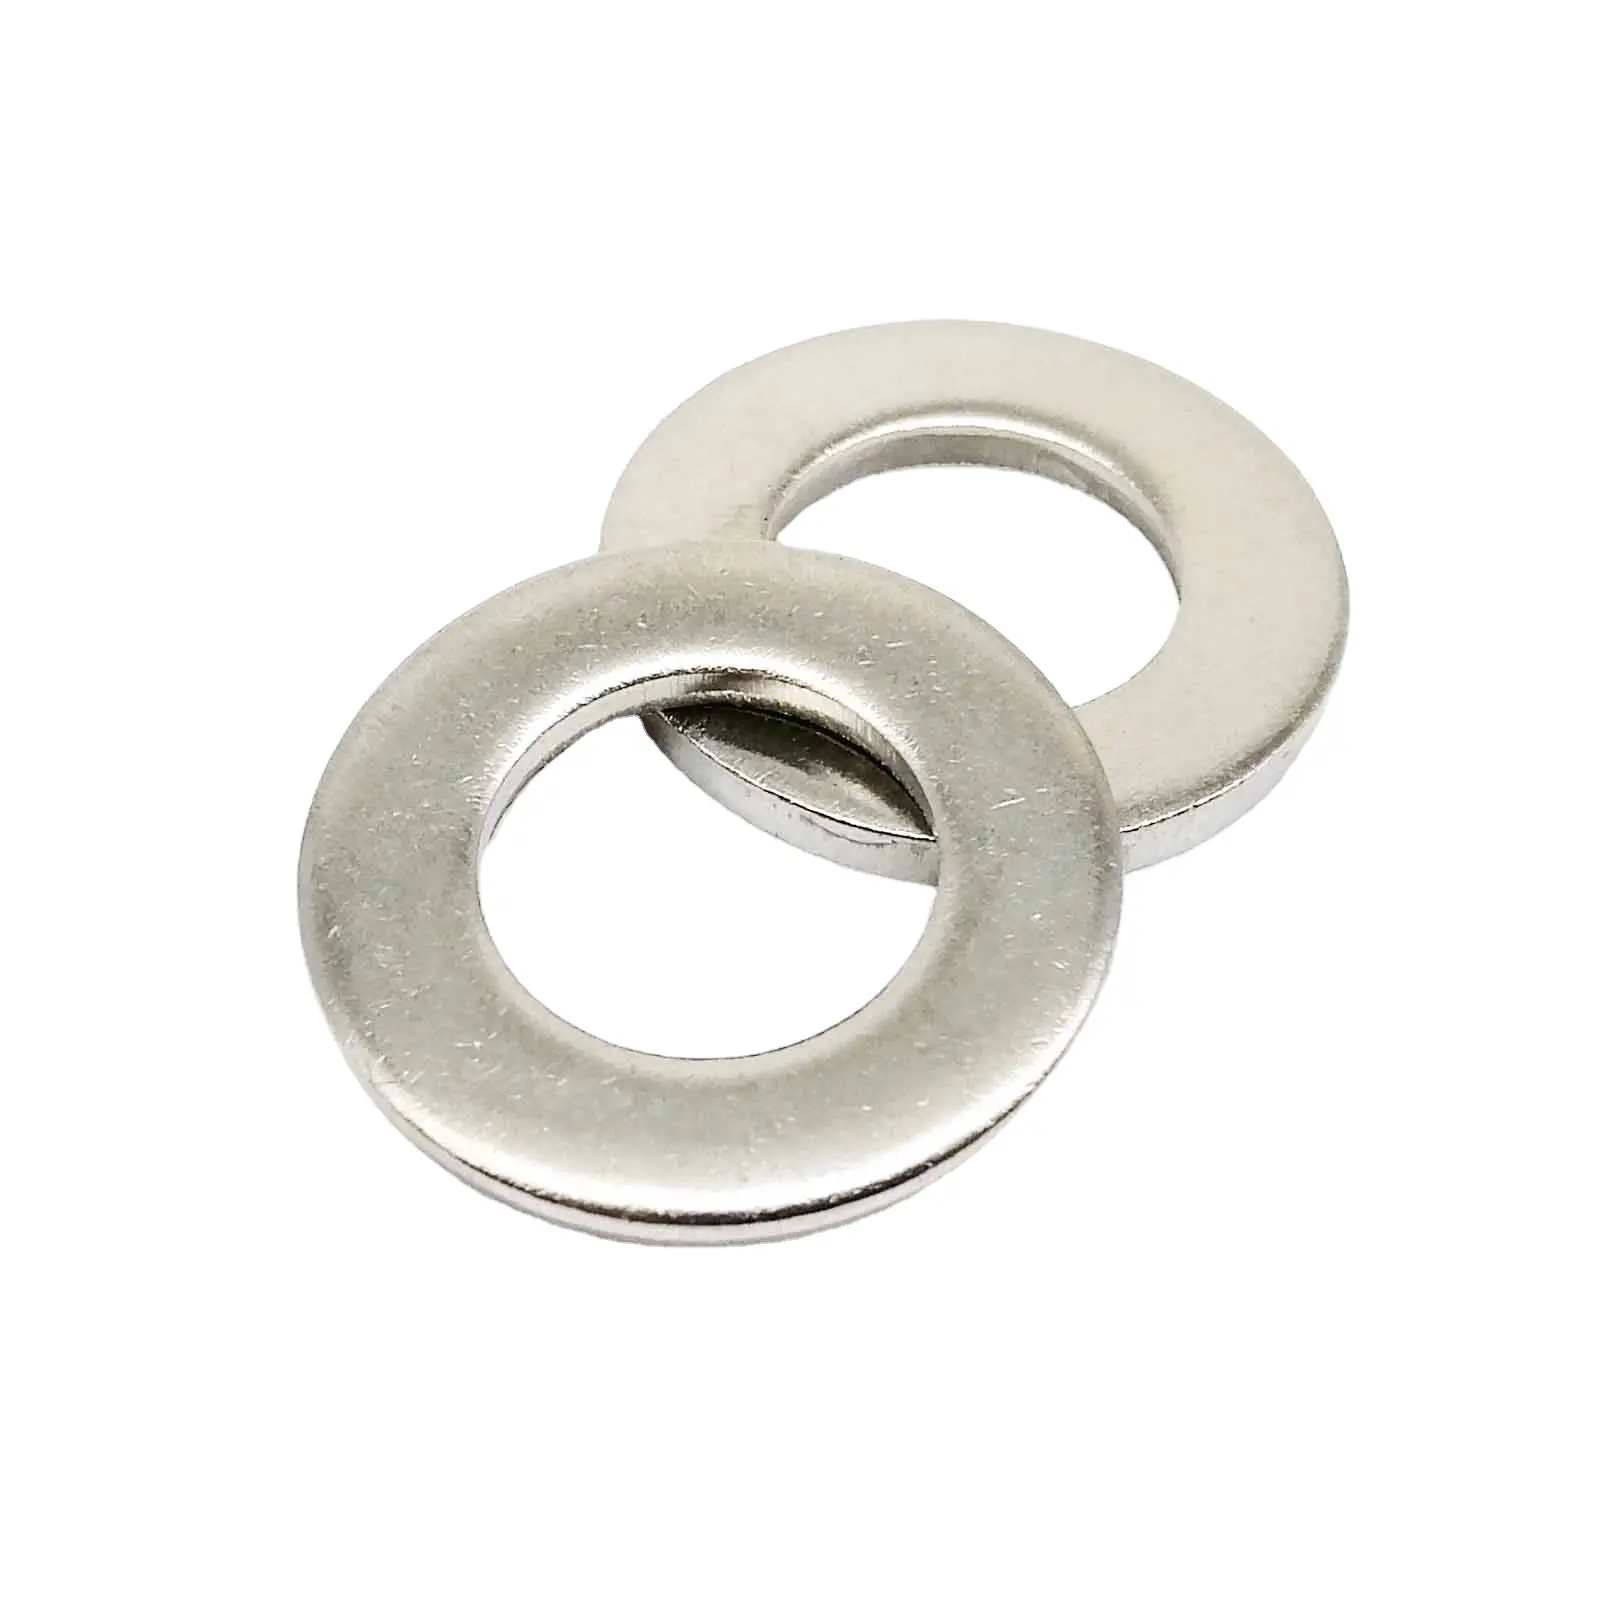 In Stock DIN1440 Stainless Steel Metal Flat Washer For Bolts